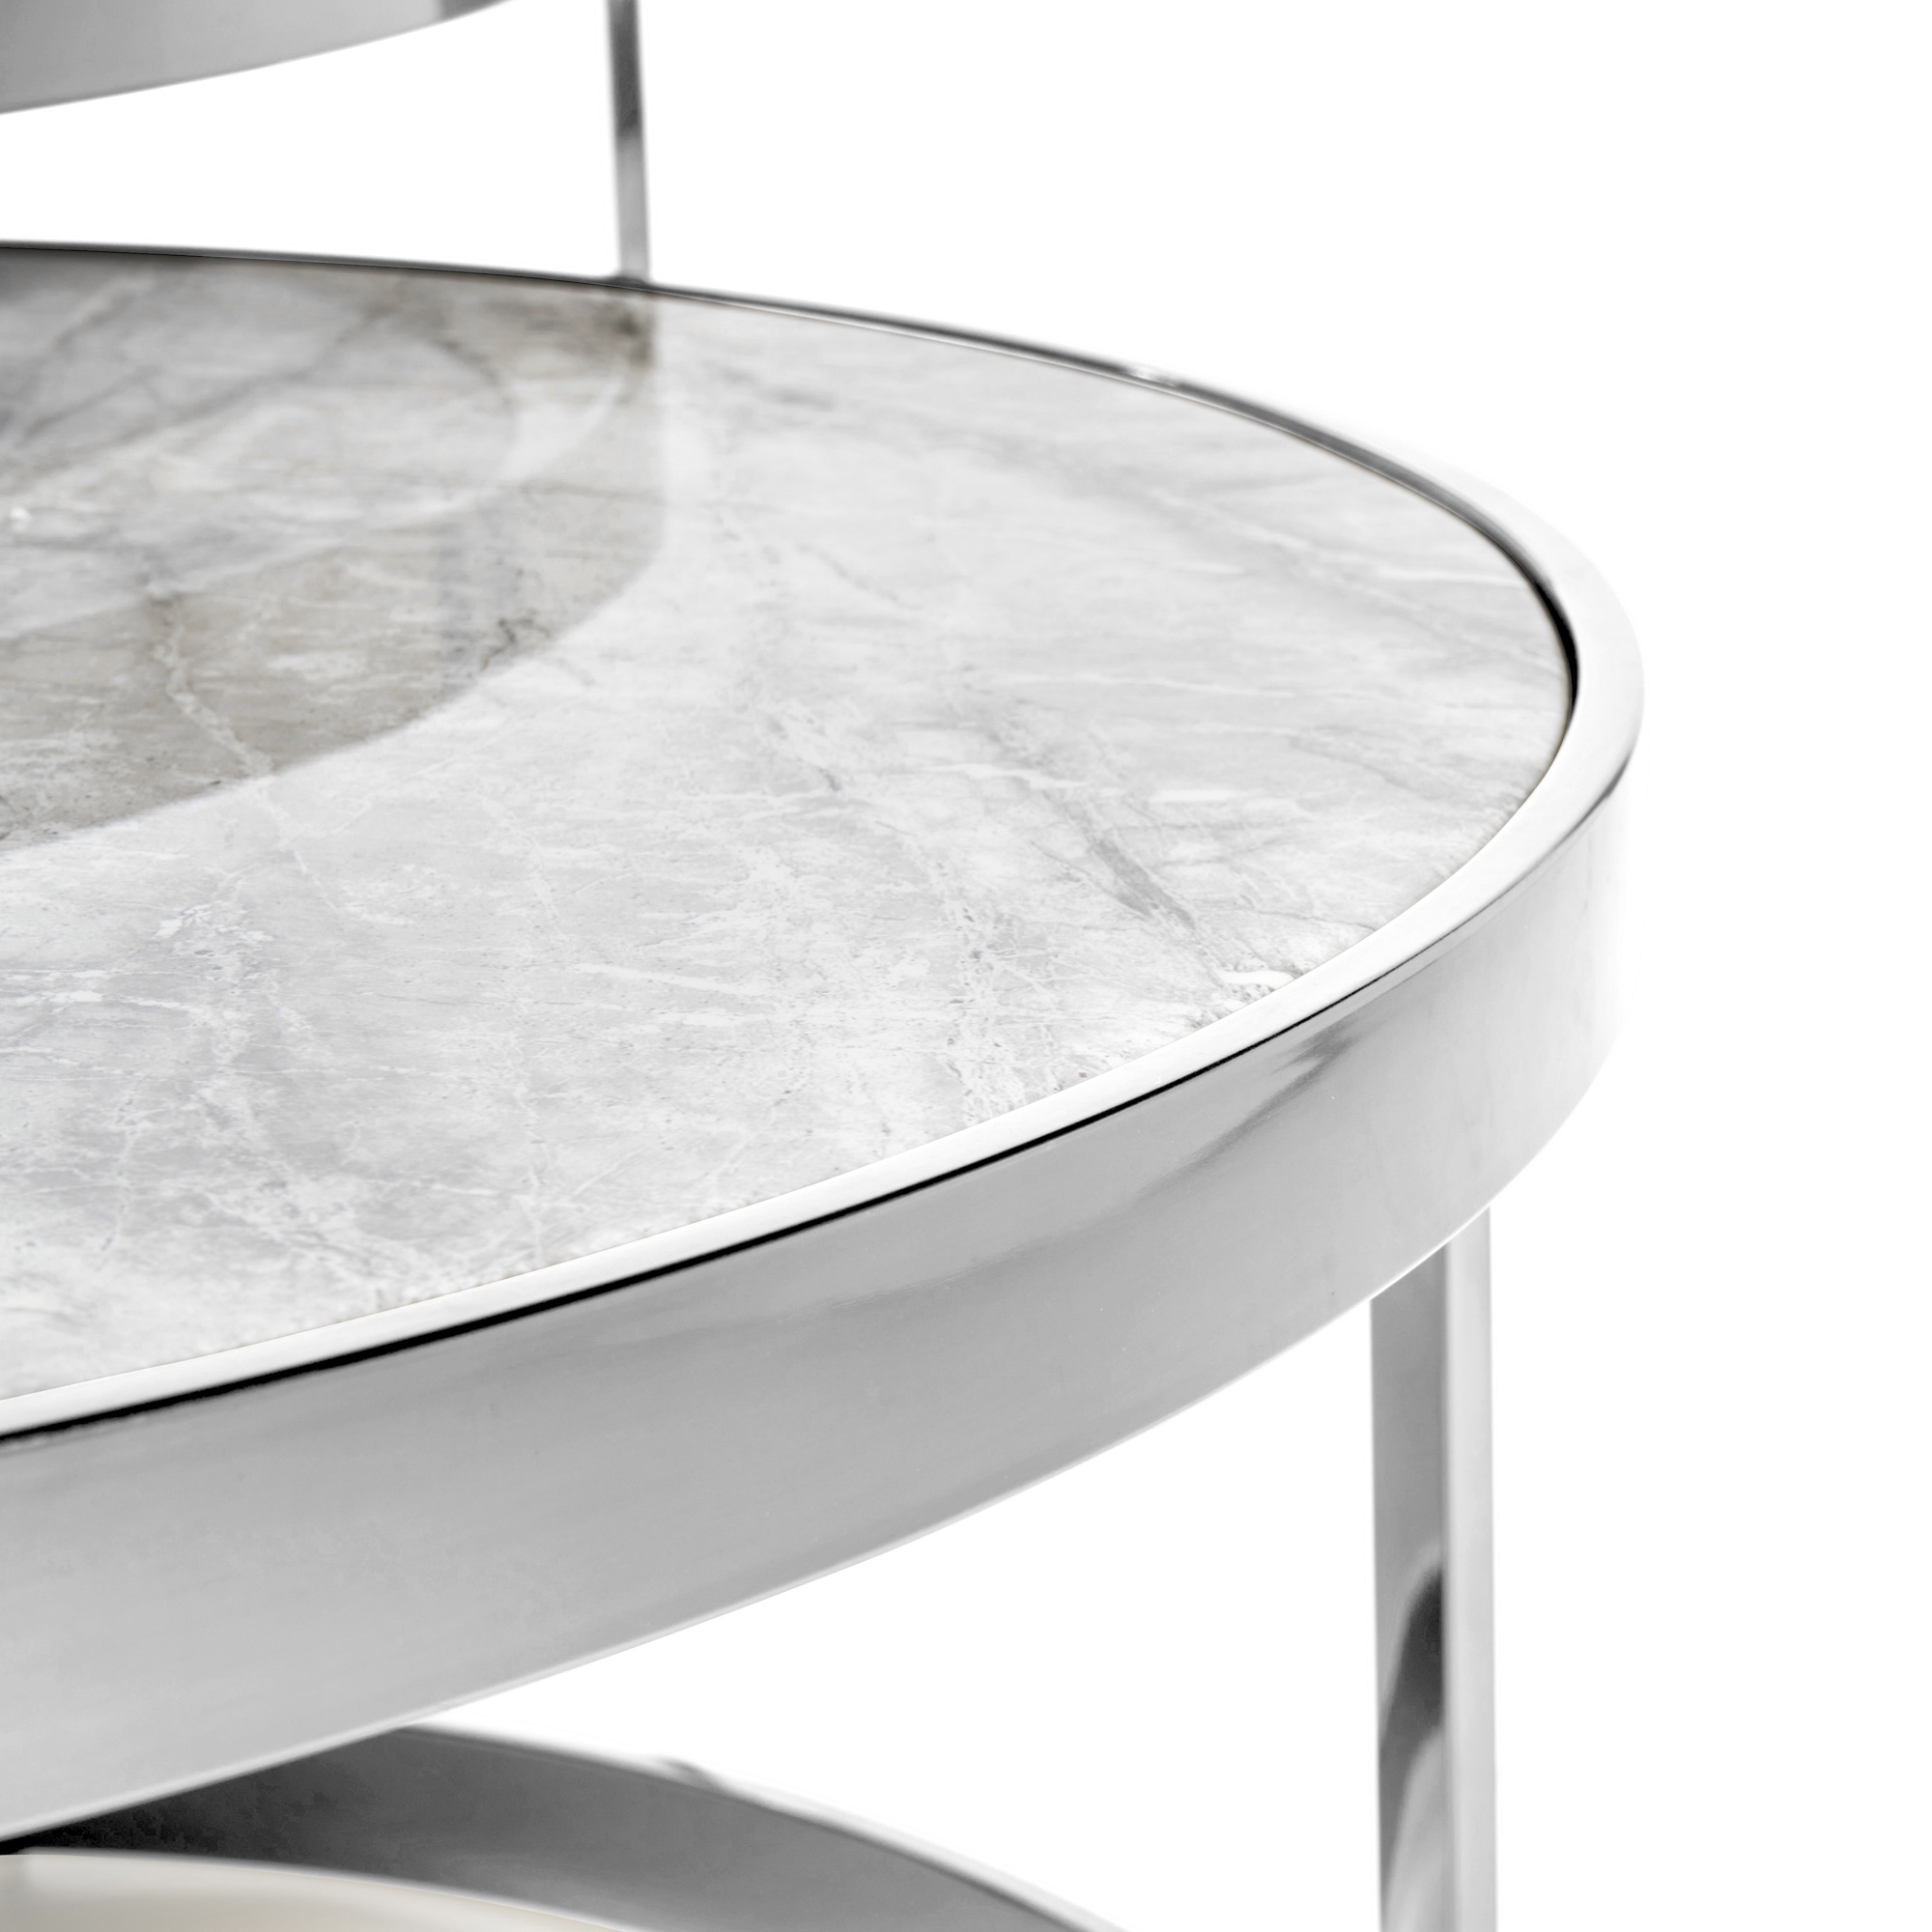 Florence Stainless Steel Framed Set of 2 Circular Coffee Nest Tables – Grey Marble